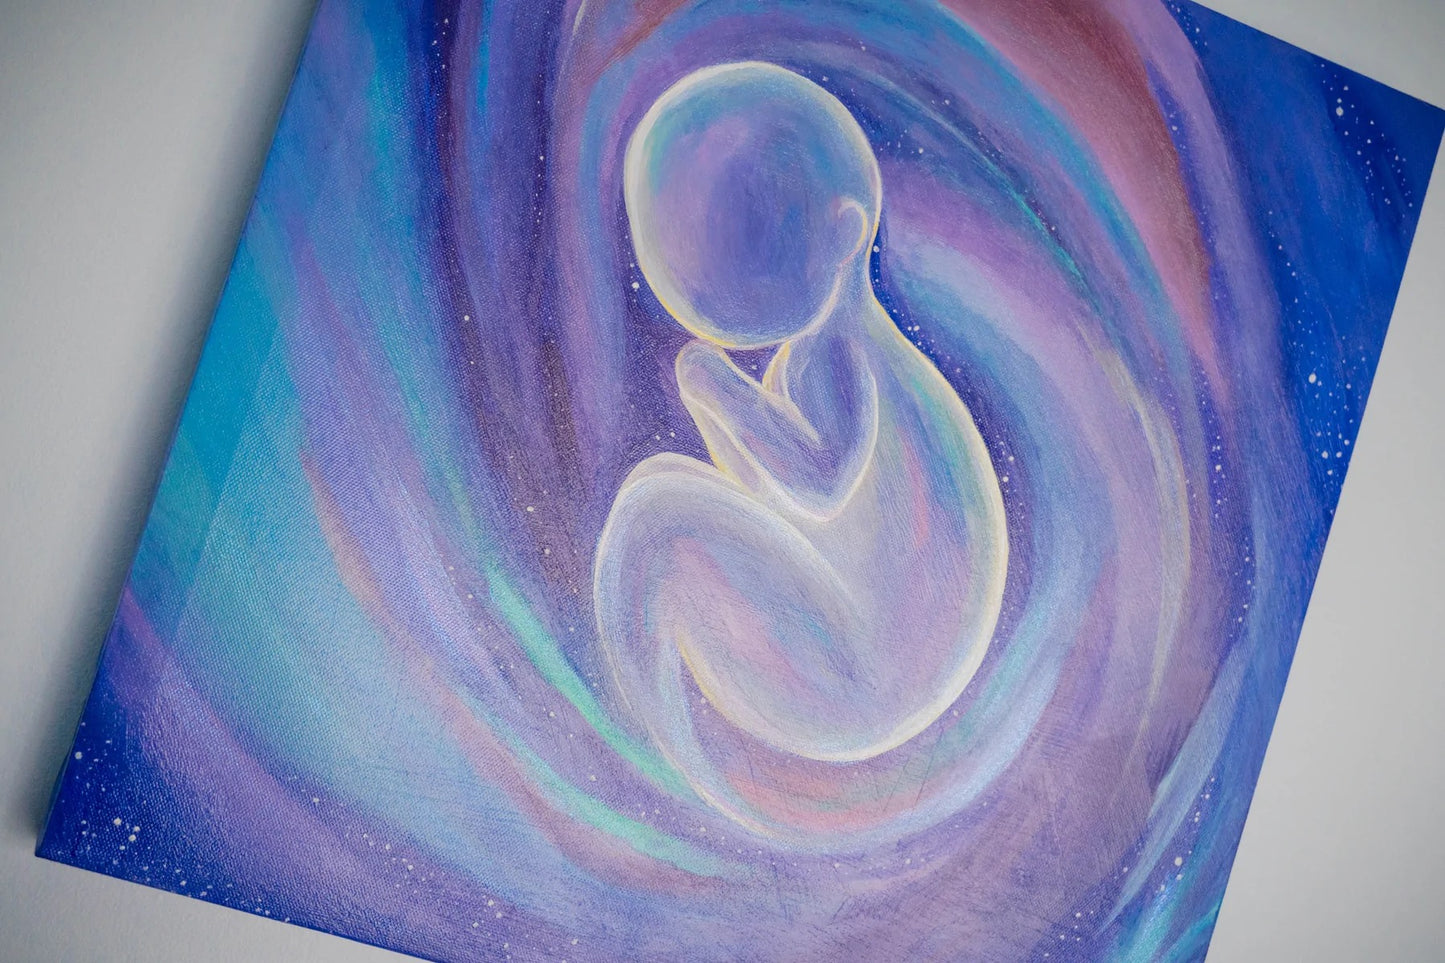 Angel Baby with Stars in Pastel Colours - Original Glow in the Dark Painting Angel Baby for Infant Loss, Stillbirth Memorial, Miscarriage, Infant Loss gift, Still Born Sympathy. simple spiritual art